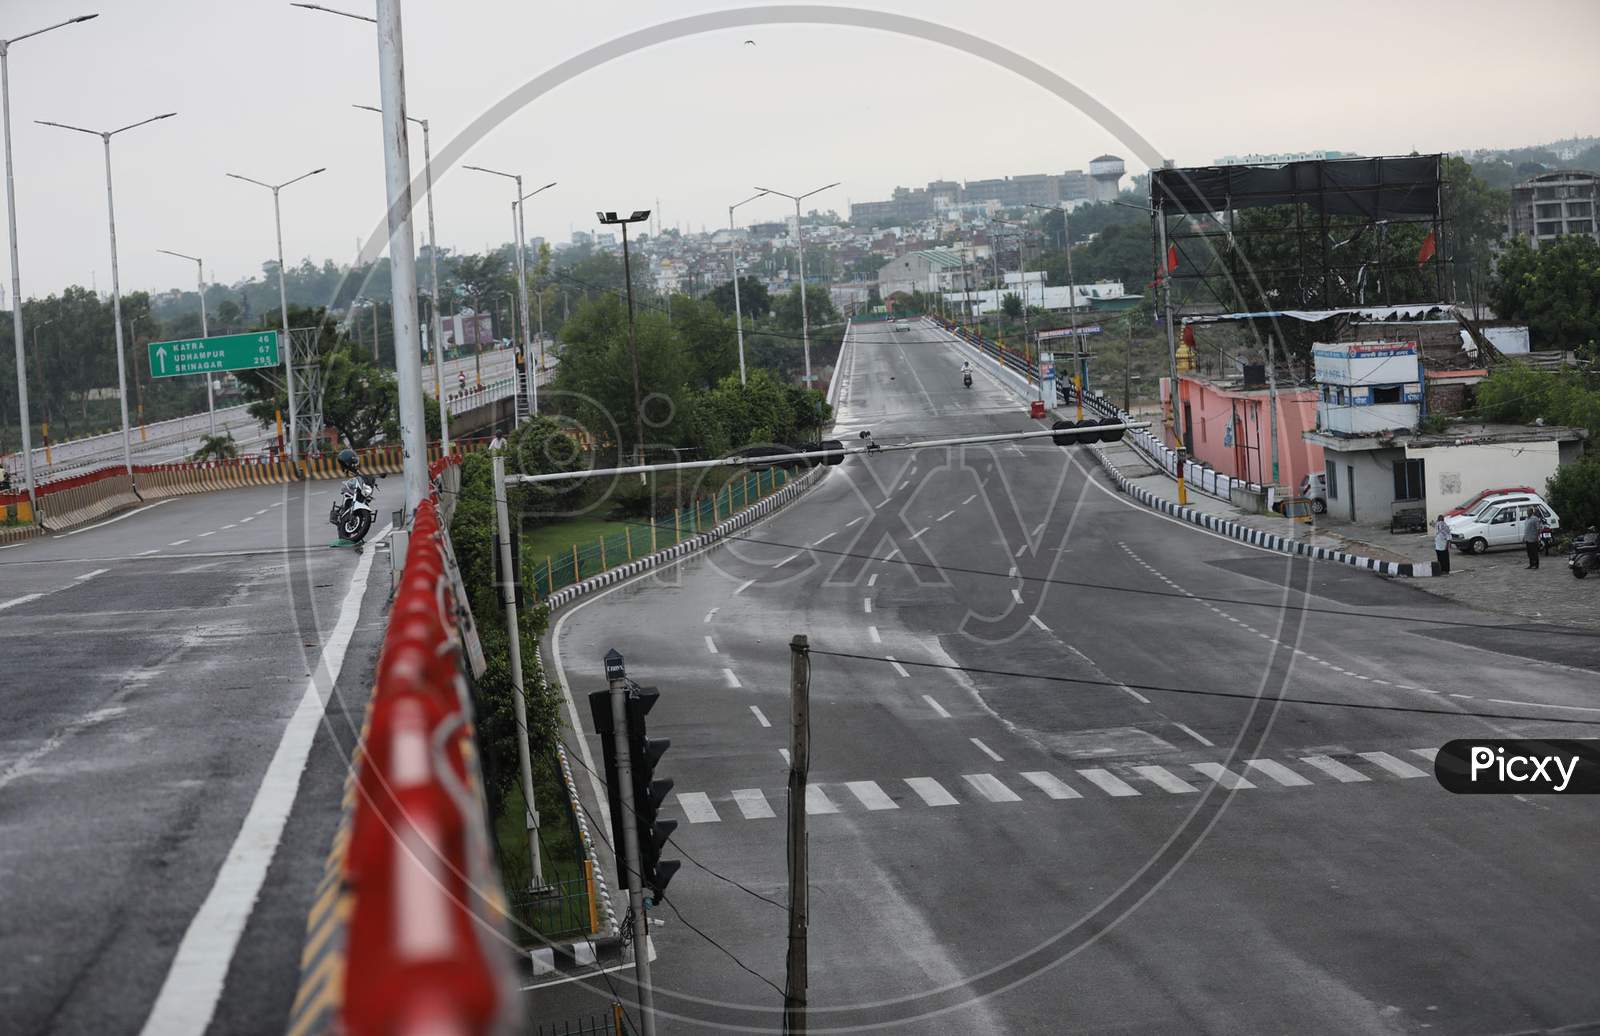 Deserted look of a road as authorities imposed weekend lockdown from 6 pm to 6 am from Friday to Monday in Jammu on July 25, 2020, to prevent the spread of Coronavirus which had witnessed a spike across Jammu and Kashmir in the recent weeks.